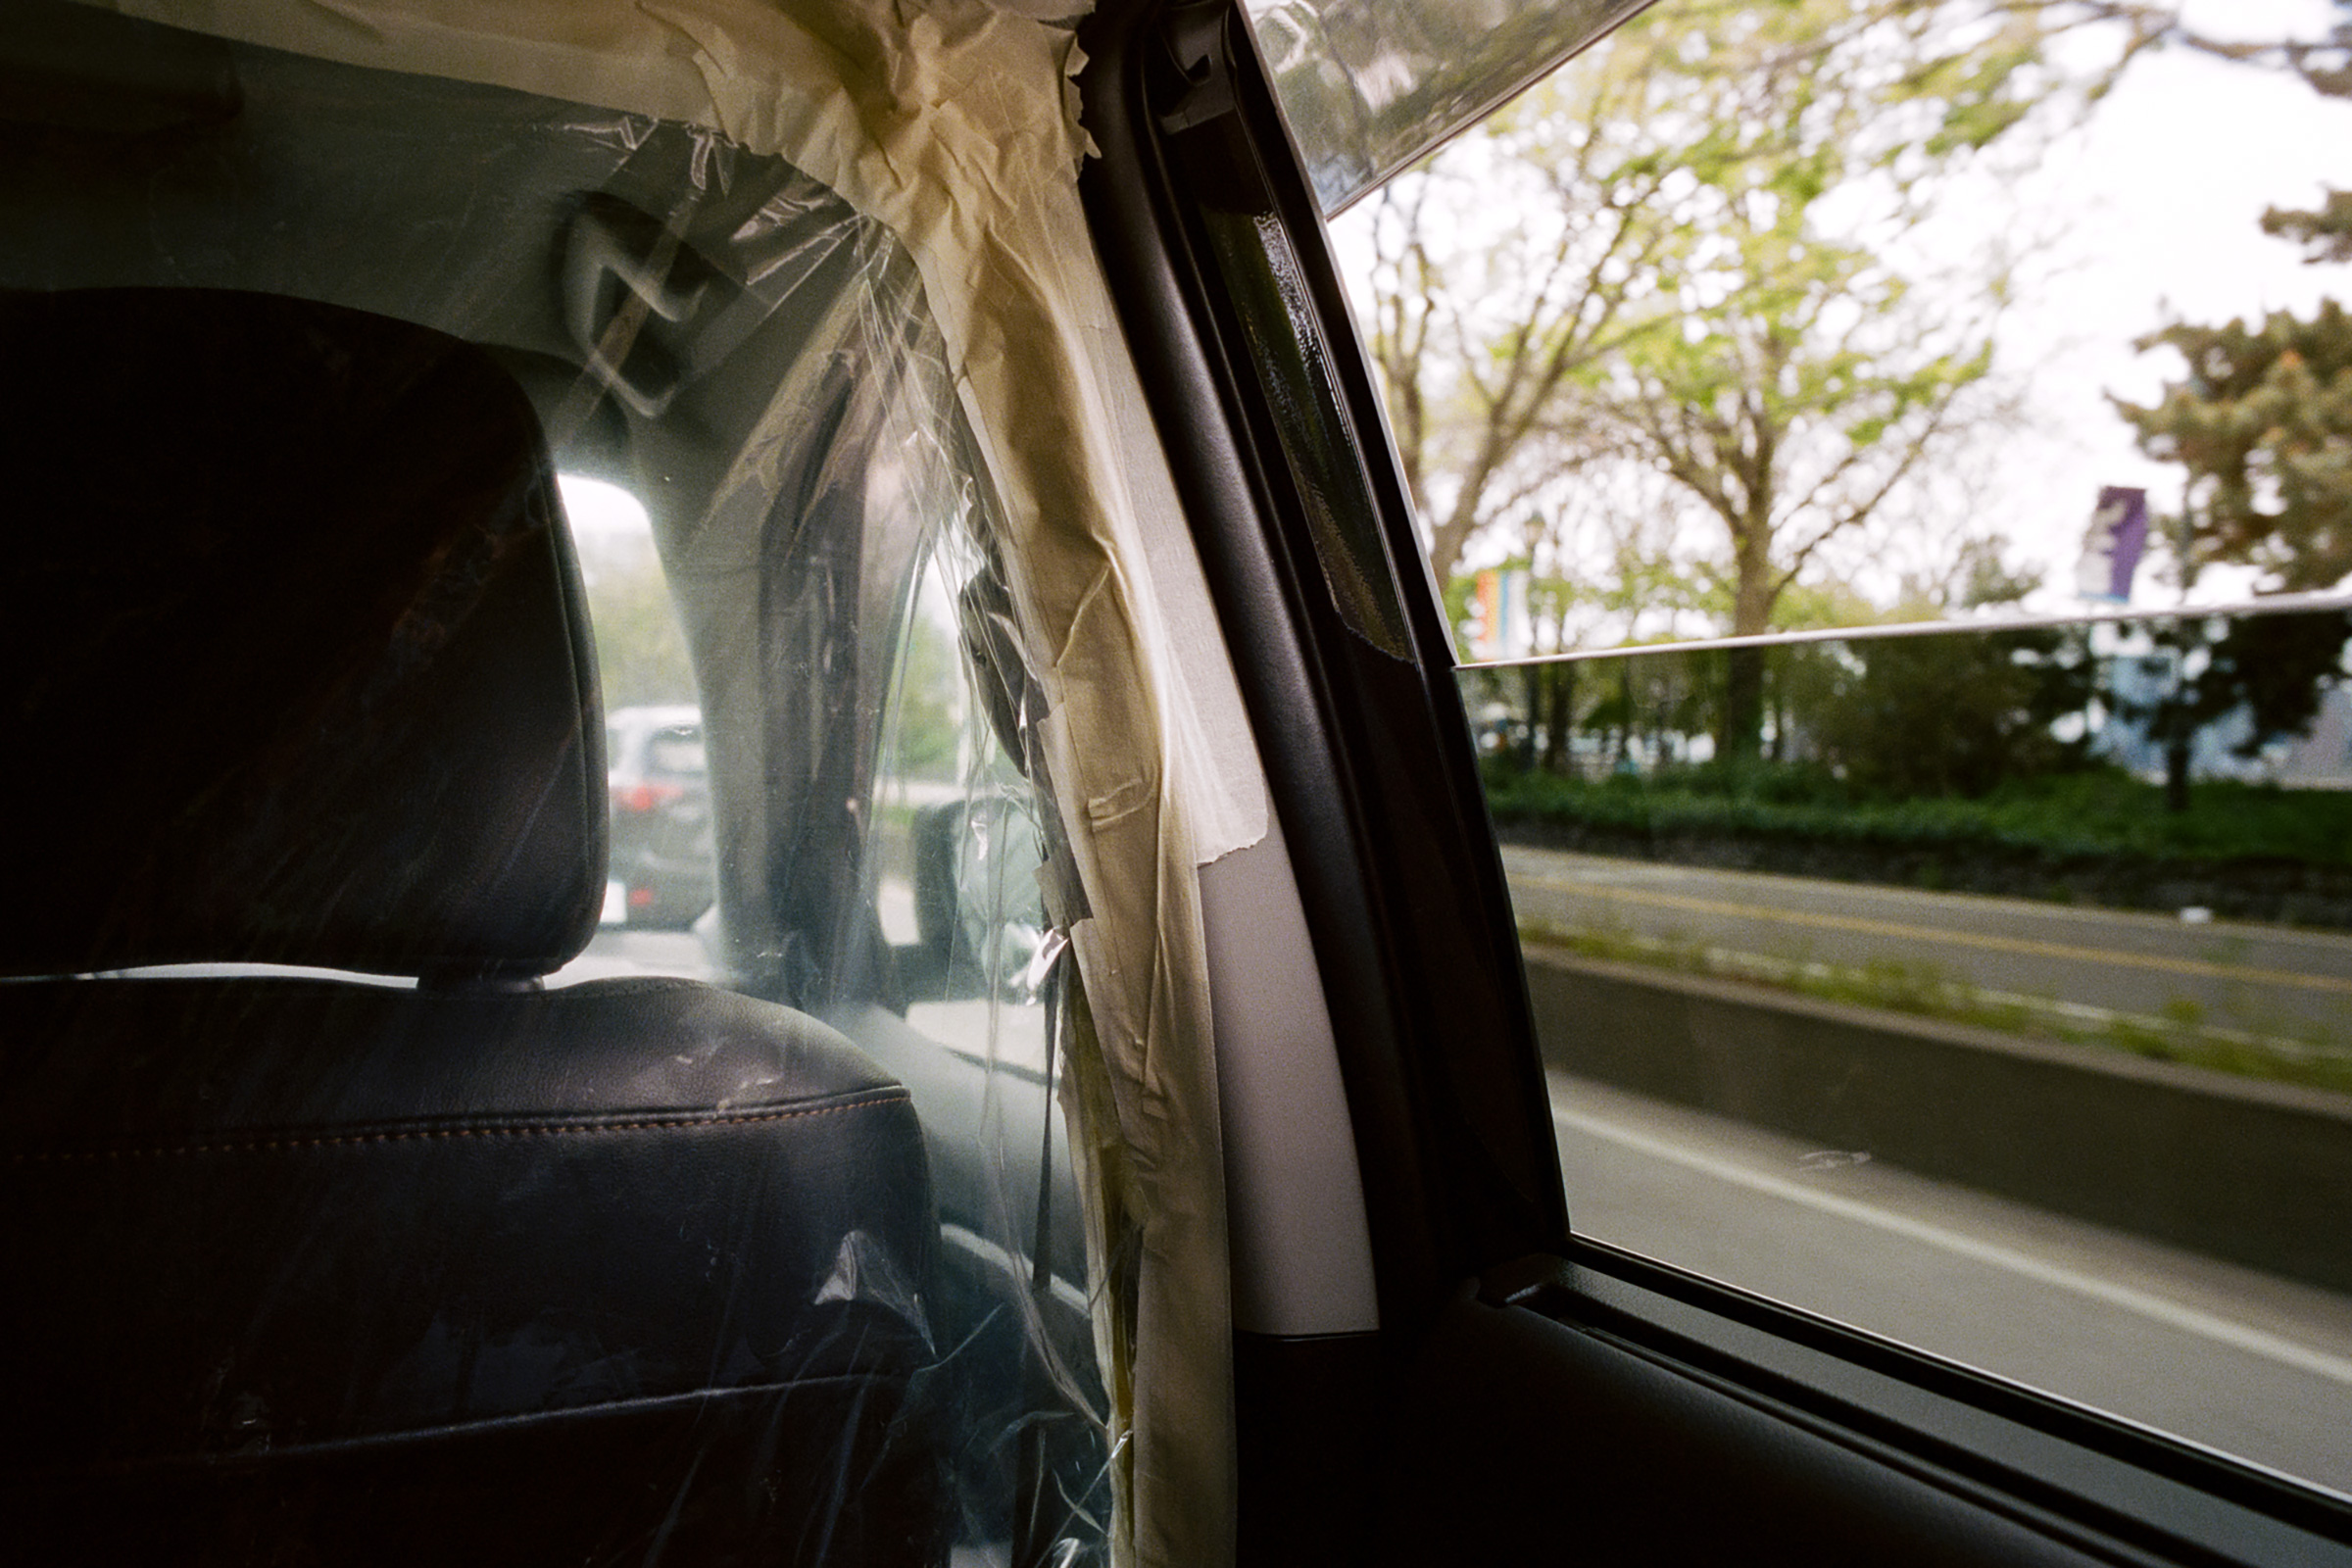 A handmade plastic partition in an Uber in New York City on May 2. (Andre D. Wagner for TIME)